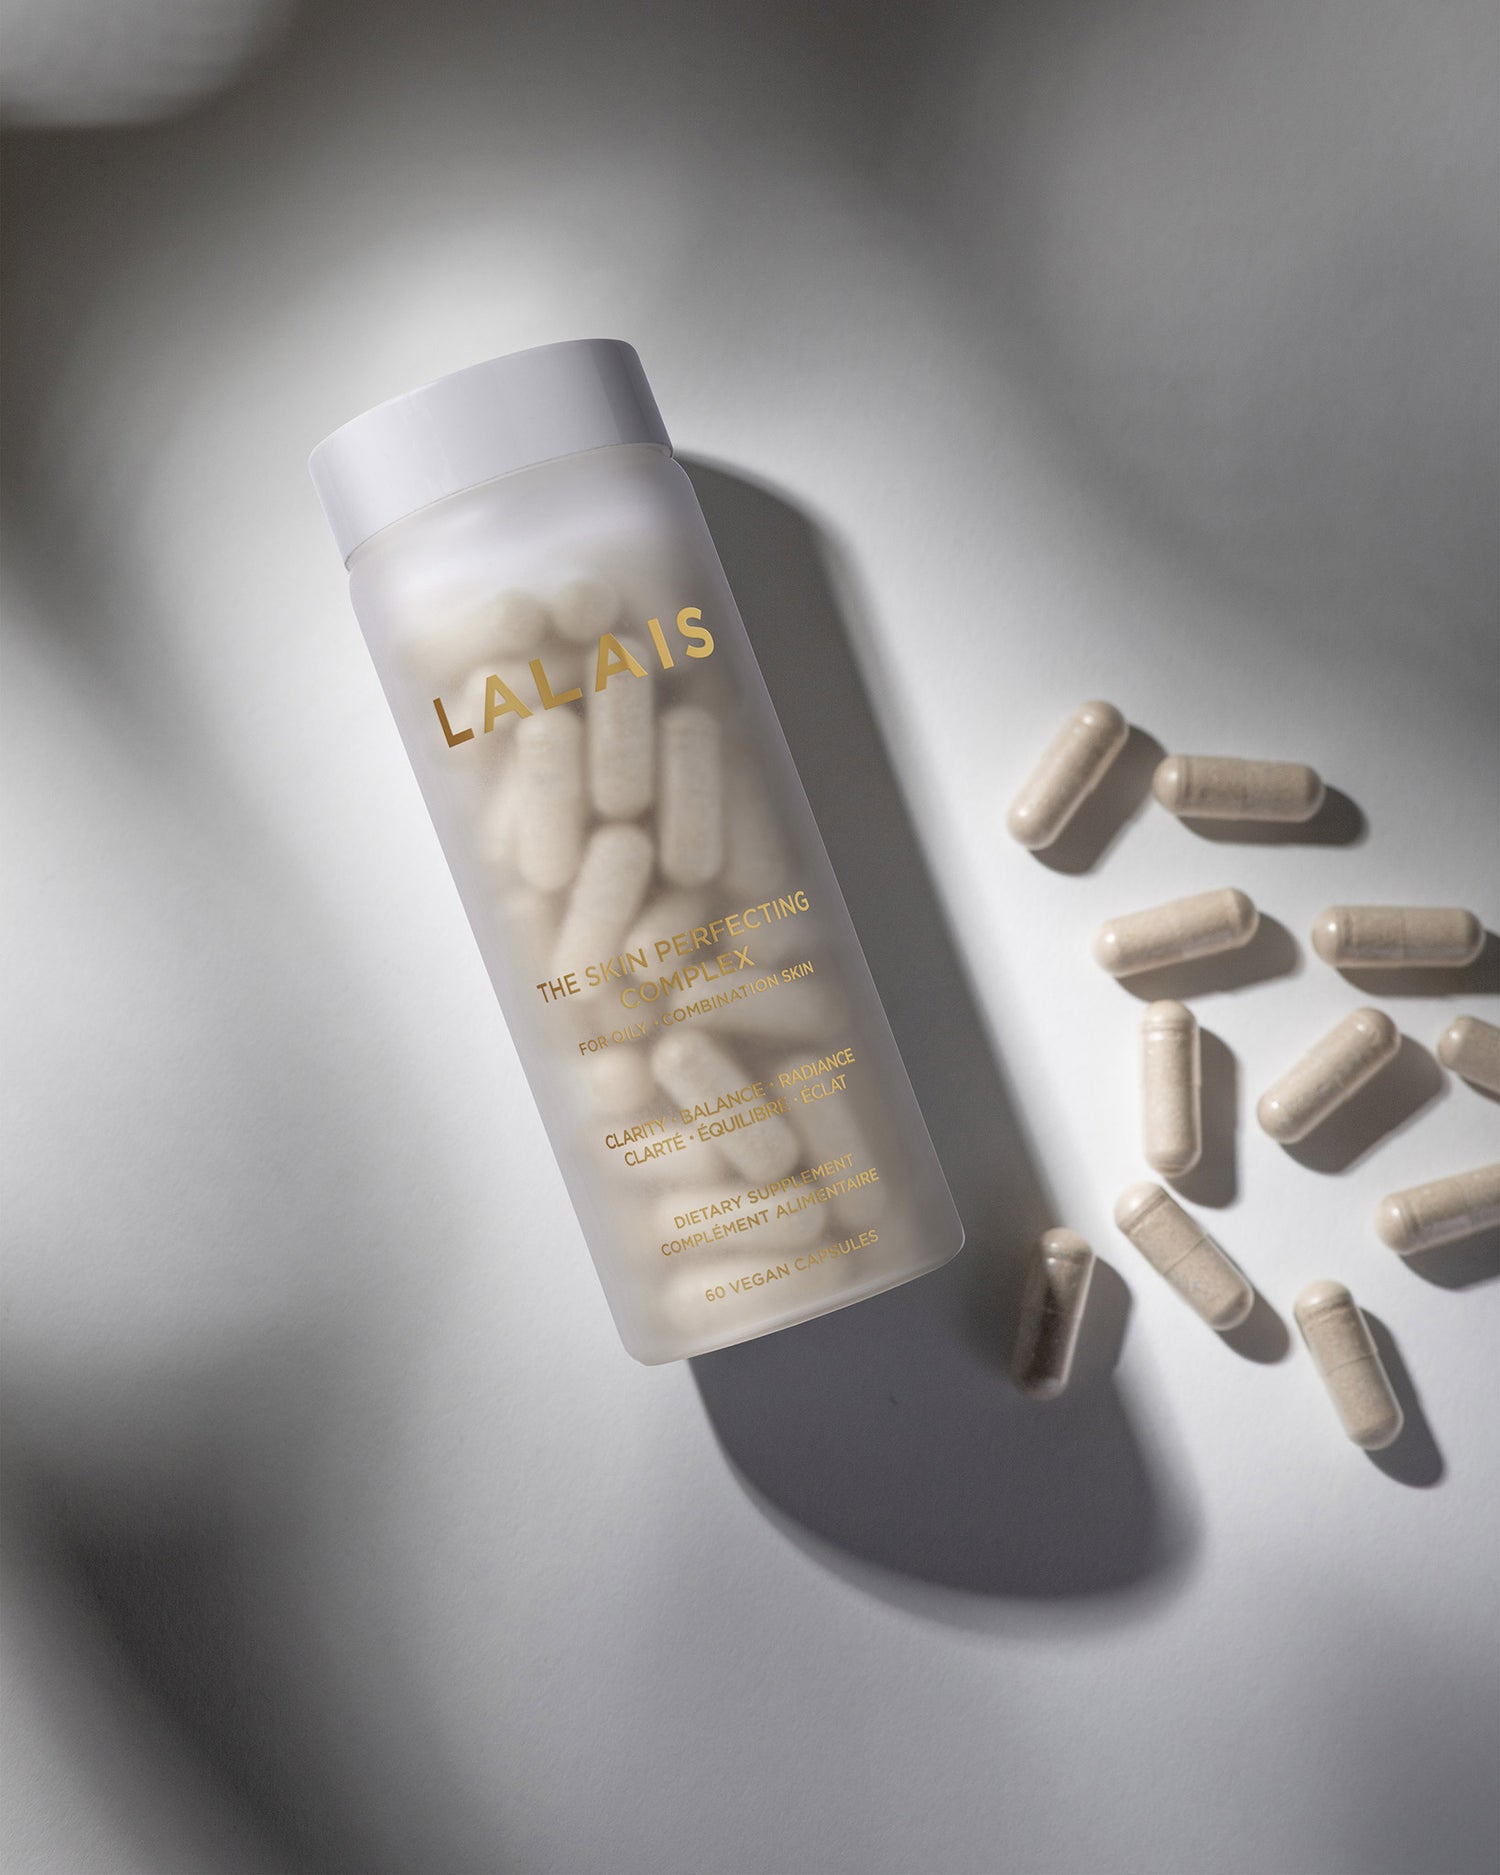 Lalais supplements in a clear bottle with loose capsules beside it.